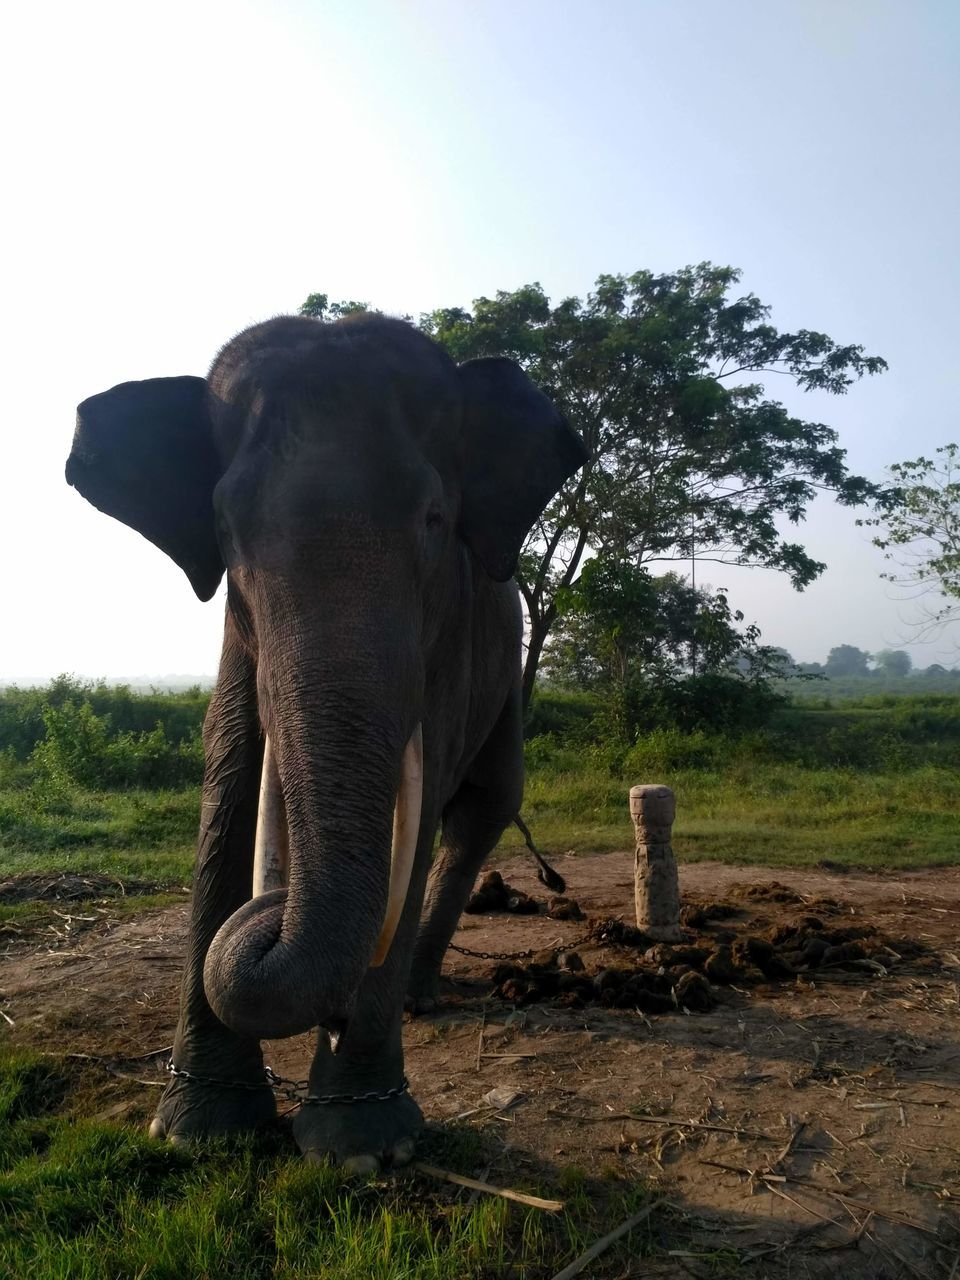 animal themes, animal, elephant, mammal, indian elephant, animal wildlife, one animal, animal body part, plant, wildlife, nature, tree, environment, no people, sky, safari, african elephant, landscape, day, grass, domestic animals, outdoors, full length, land, animal trunk, standing